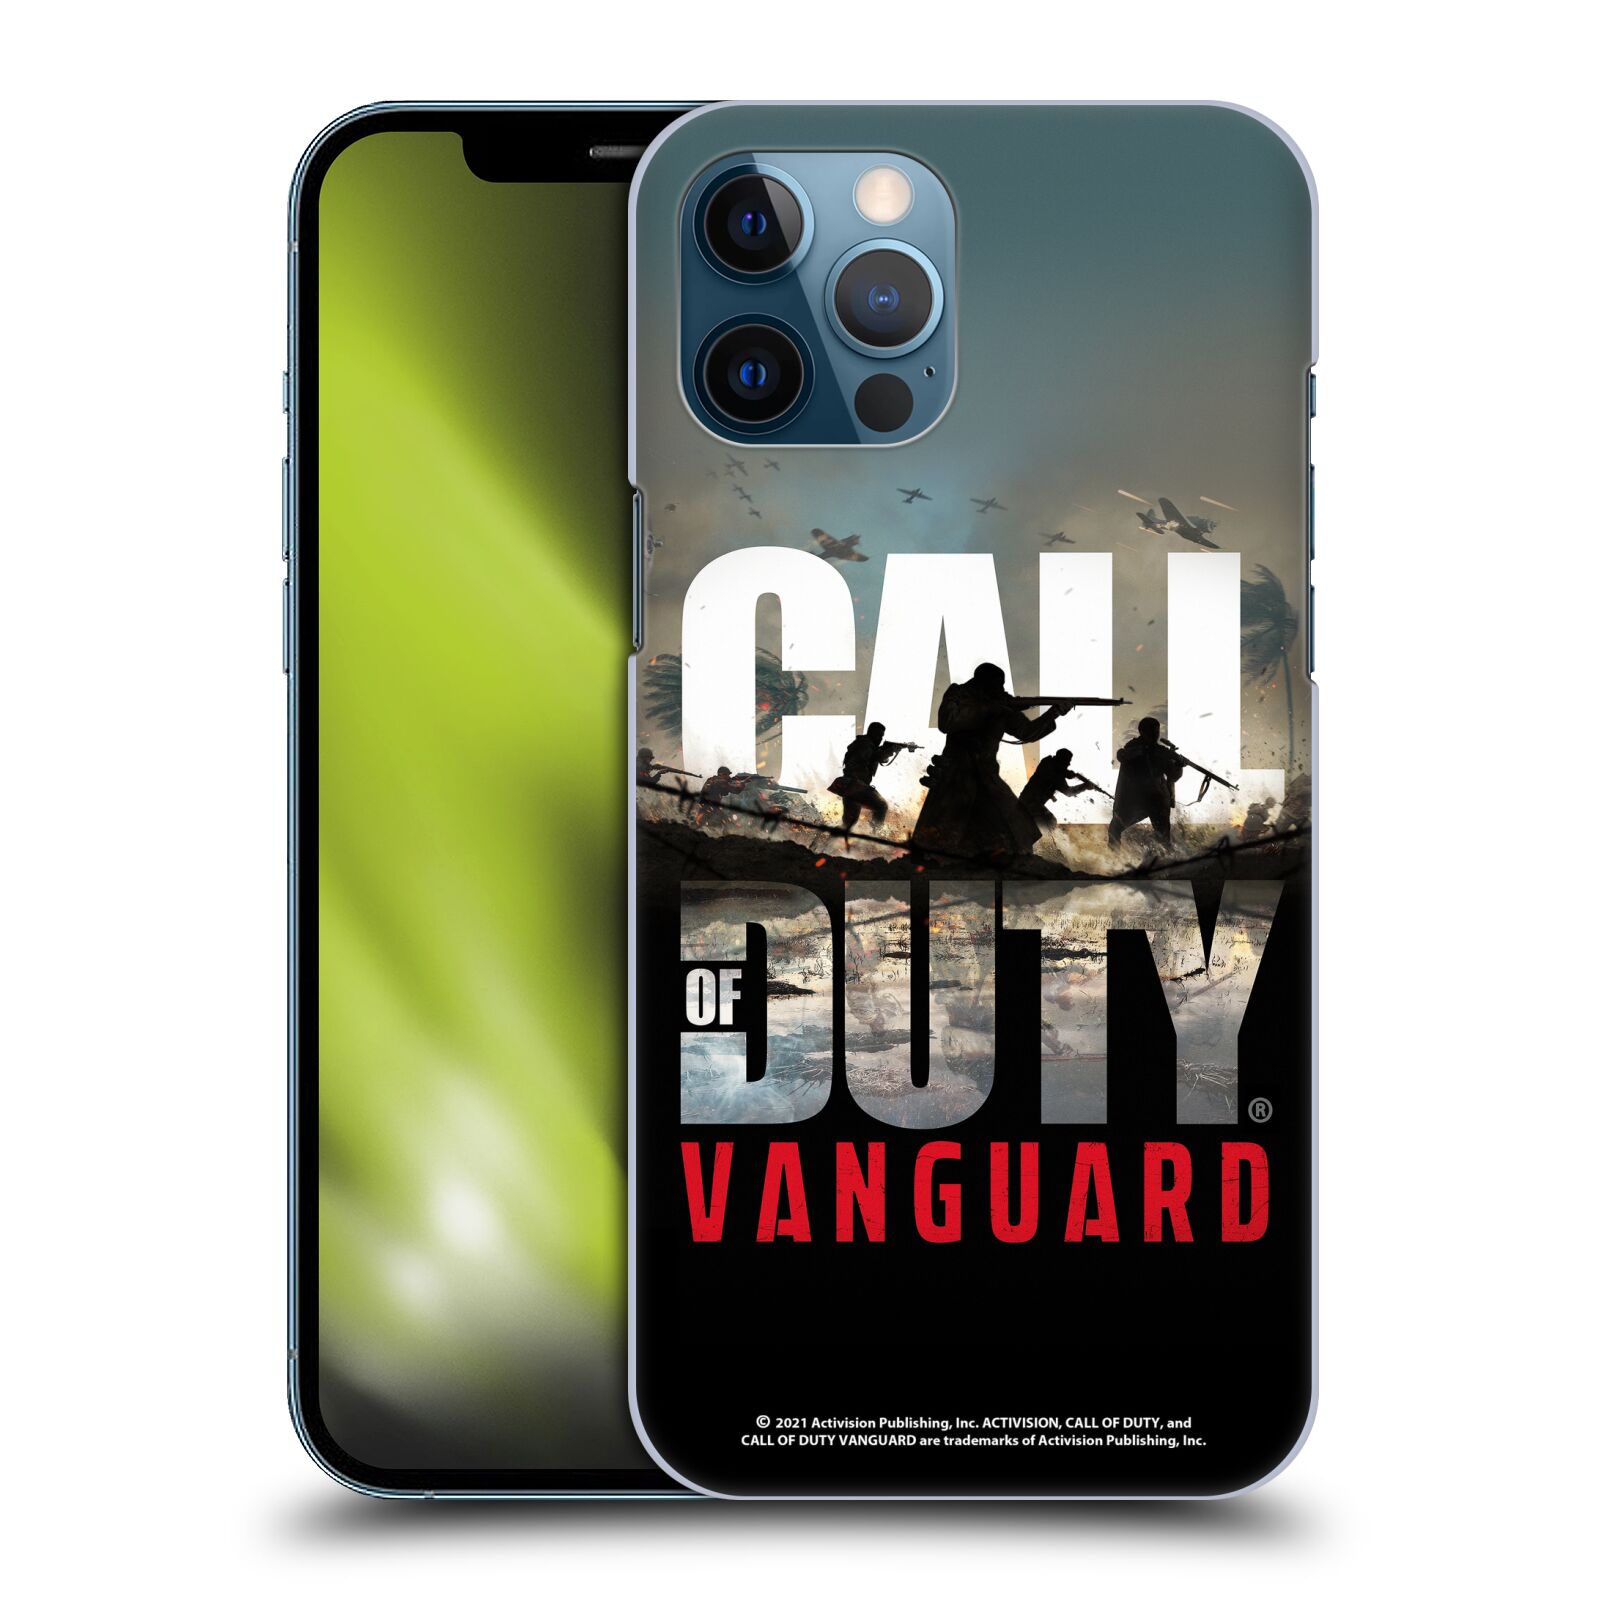 Zadní obal pro mobil Apple iPhone 12 PRO MAX - HEAD CASE - Call of Duty - Vanguard